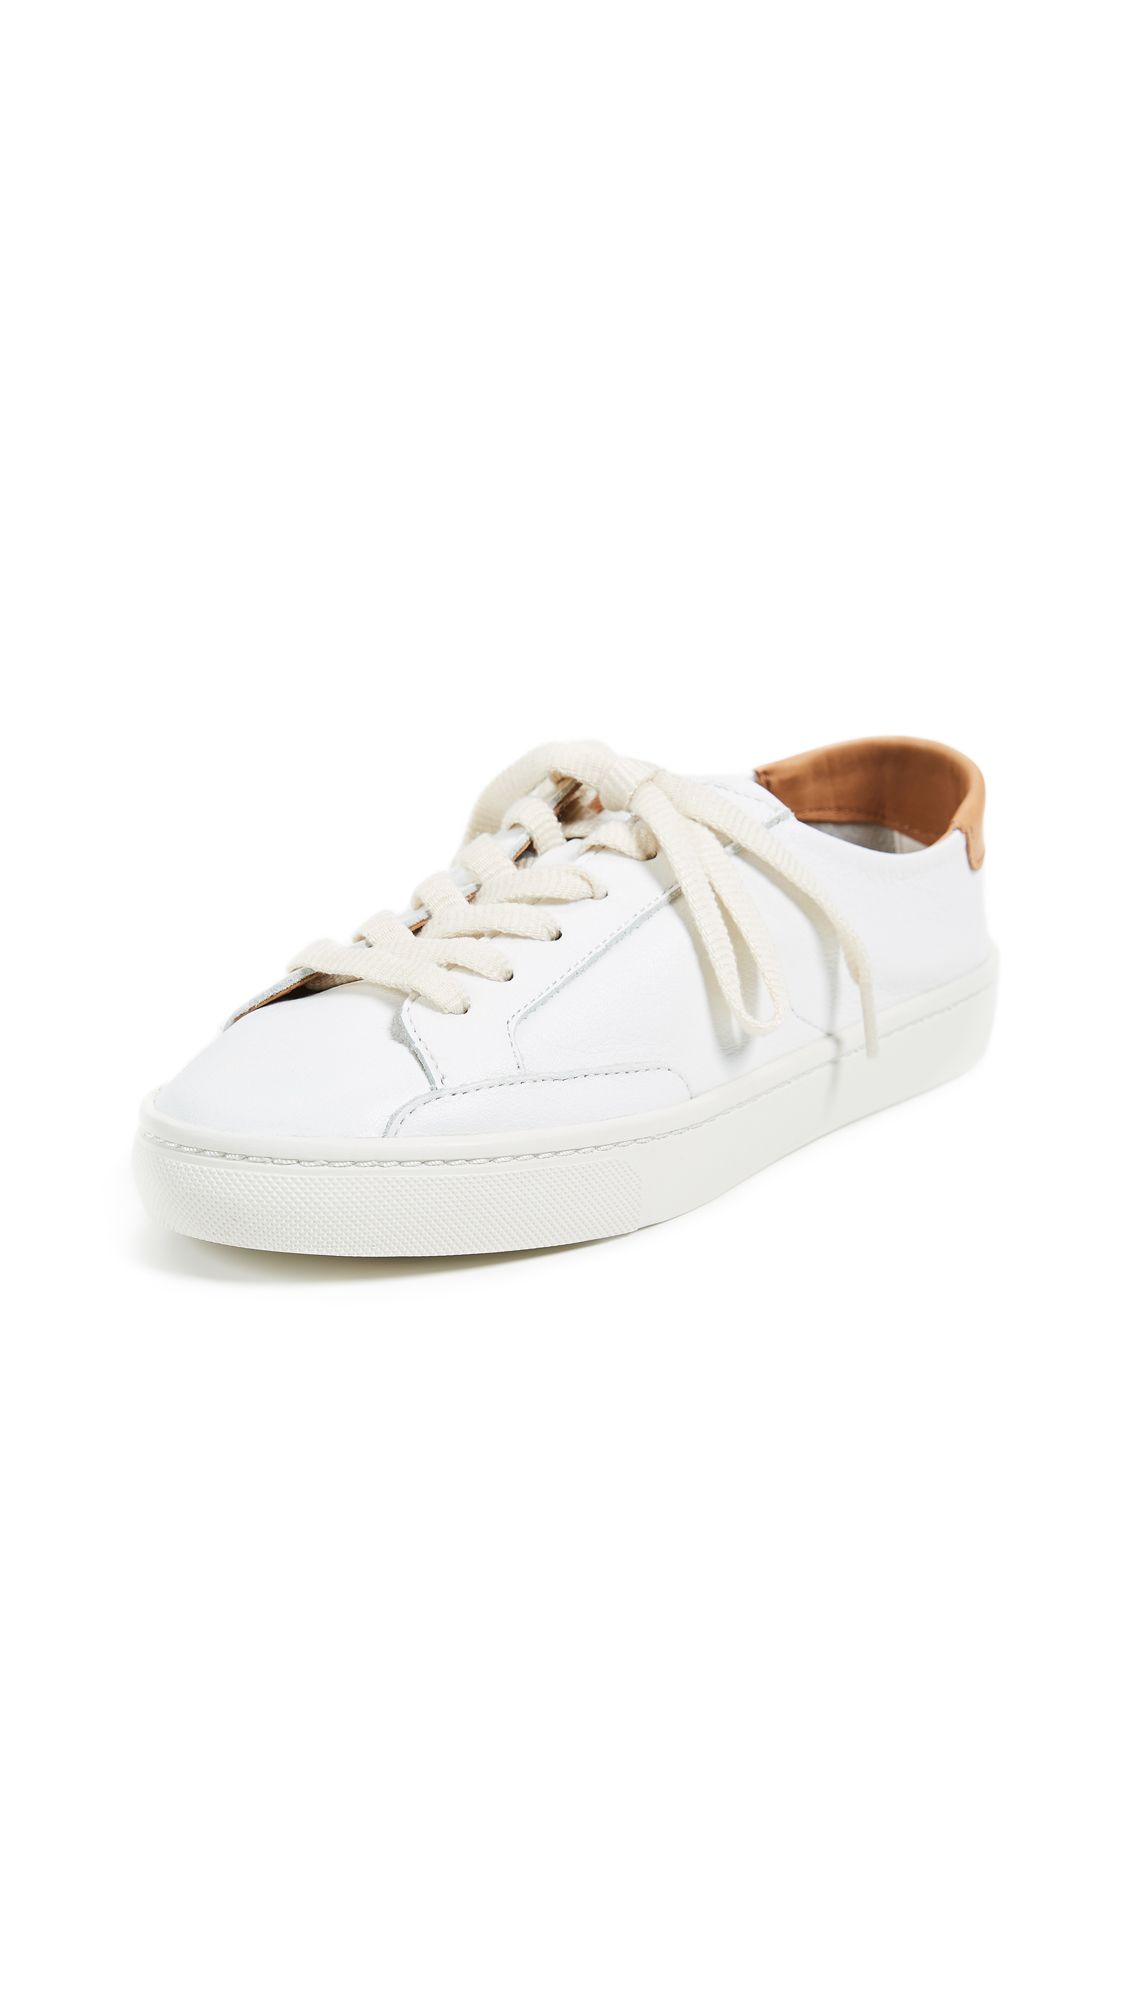 Soludos Ibiza Classic Lace Up Sneakers | Shopbop